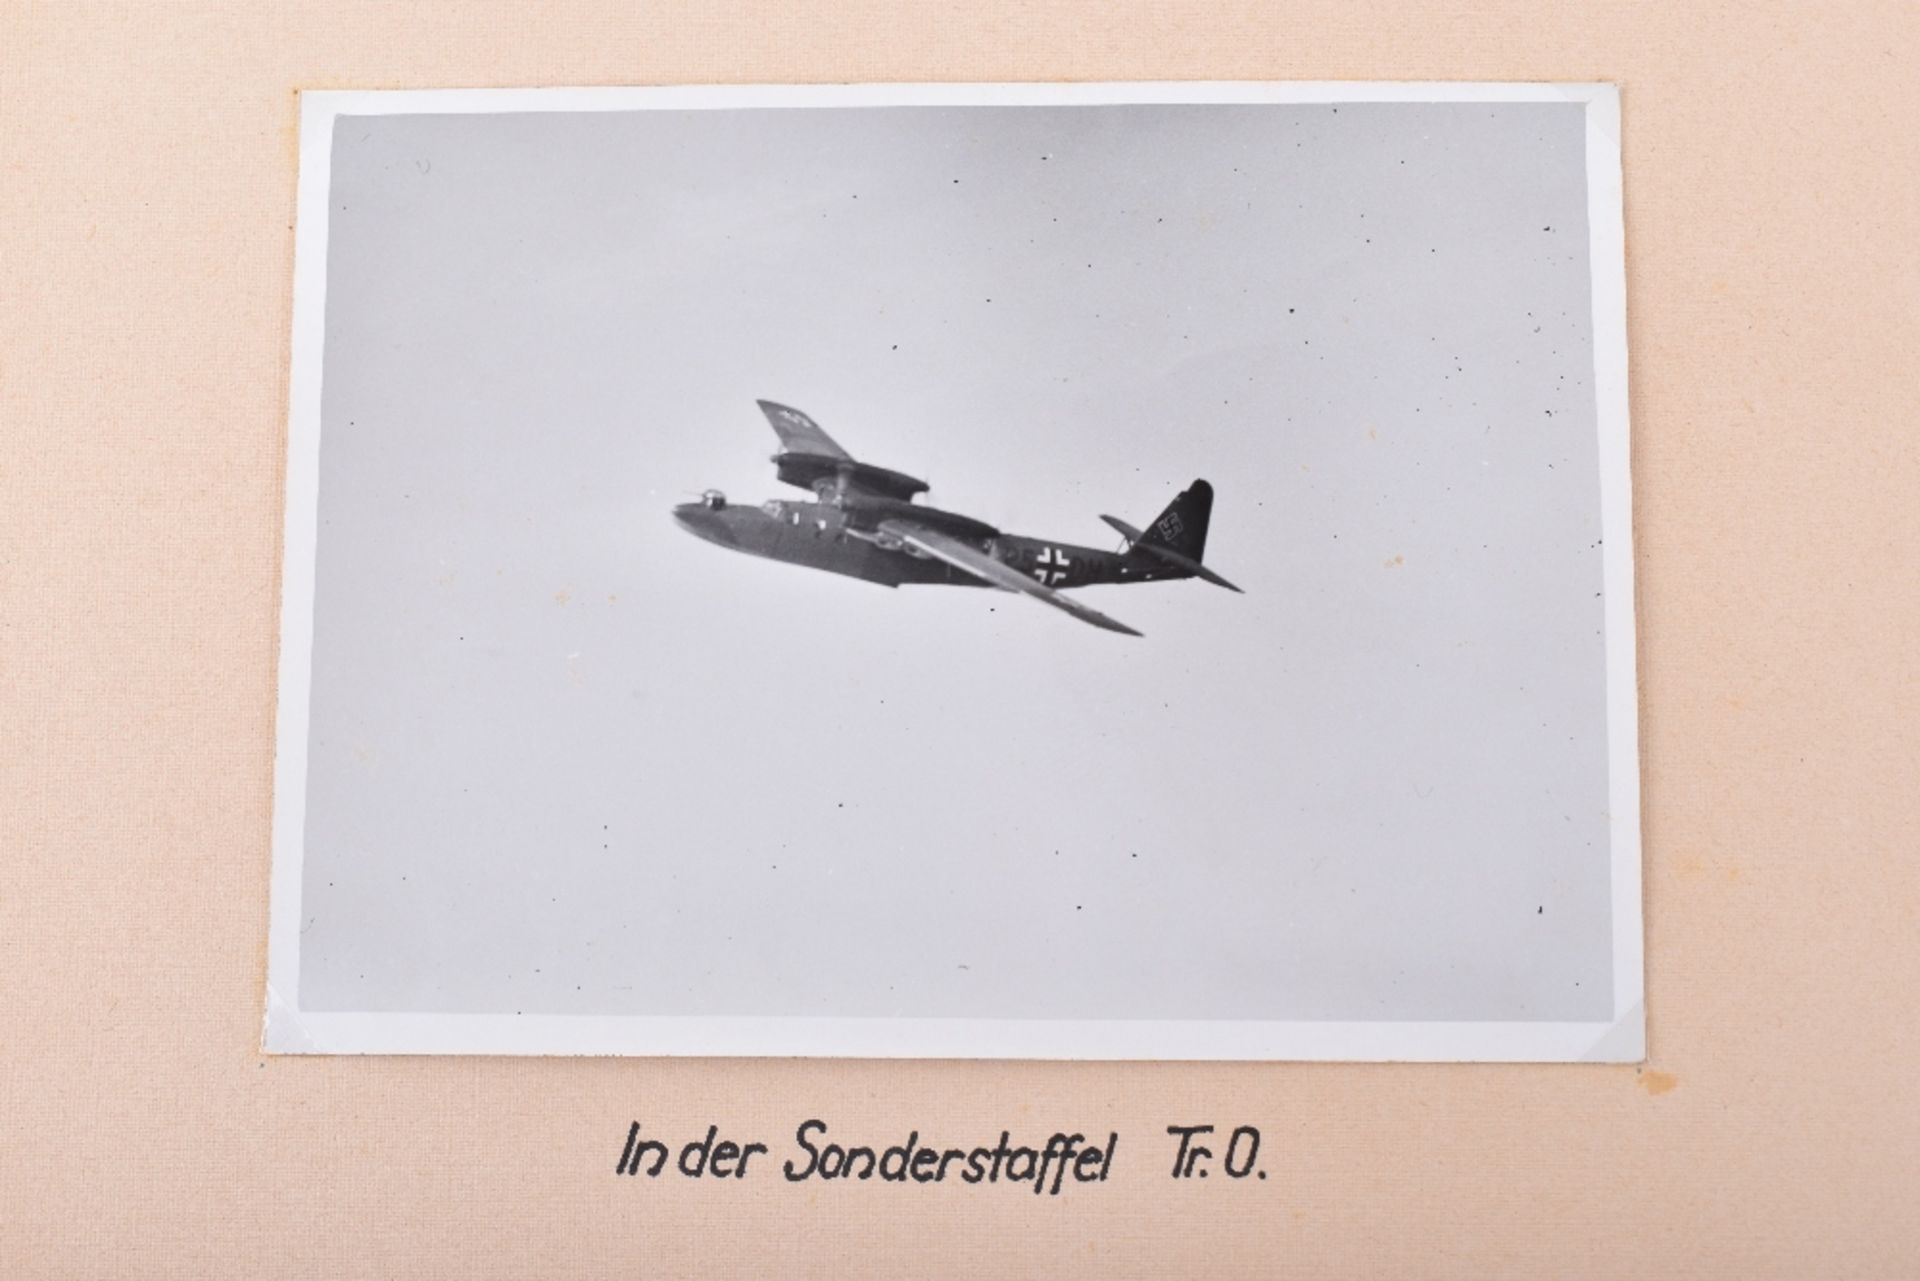 Outstanding and Historically Interesting Luftwaffe Photograph Album, Log Book and Soldbuch of Observ - Image 39 of 96